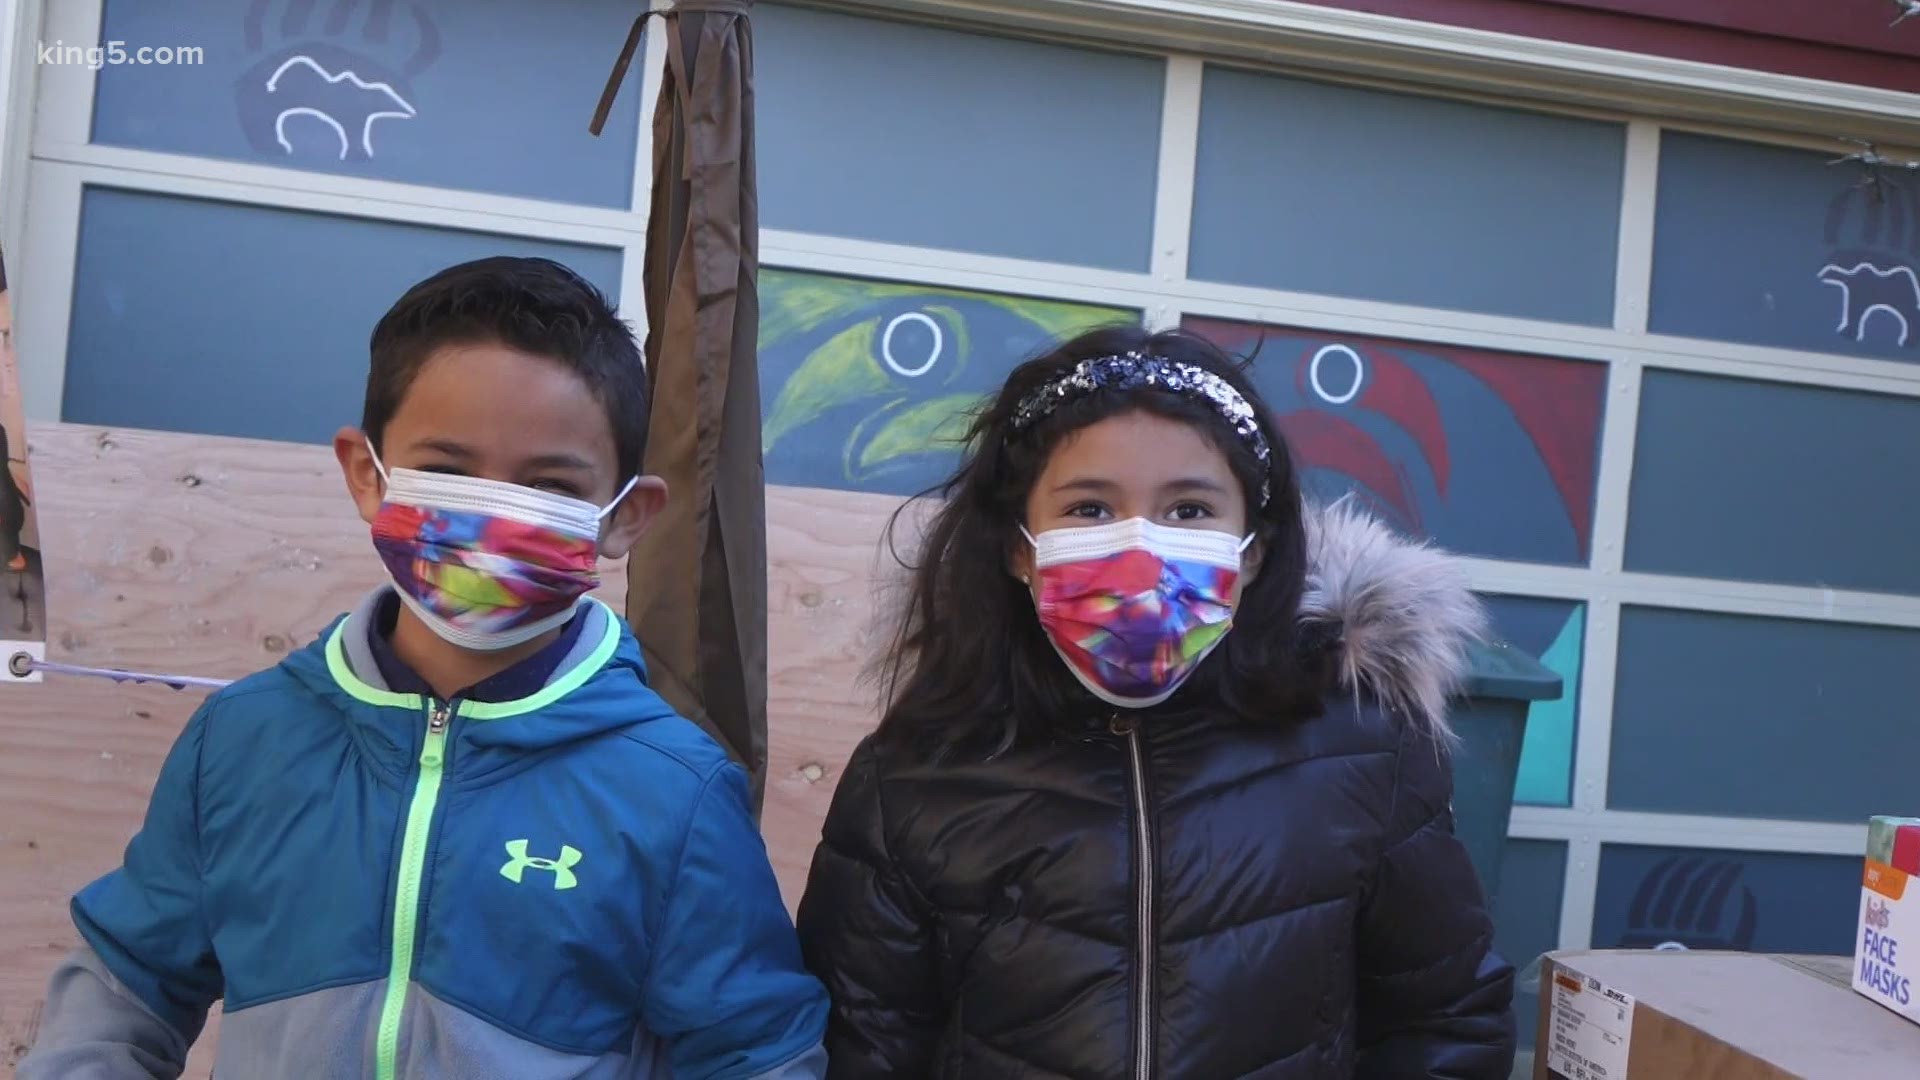 The masks are being distributed this week in Washington state and several organizations have teamed up to provide them for free.